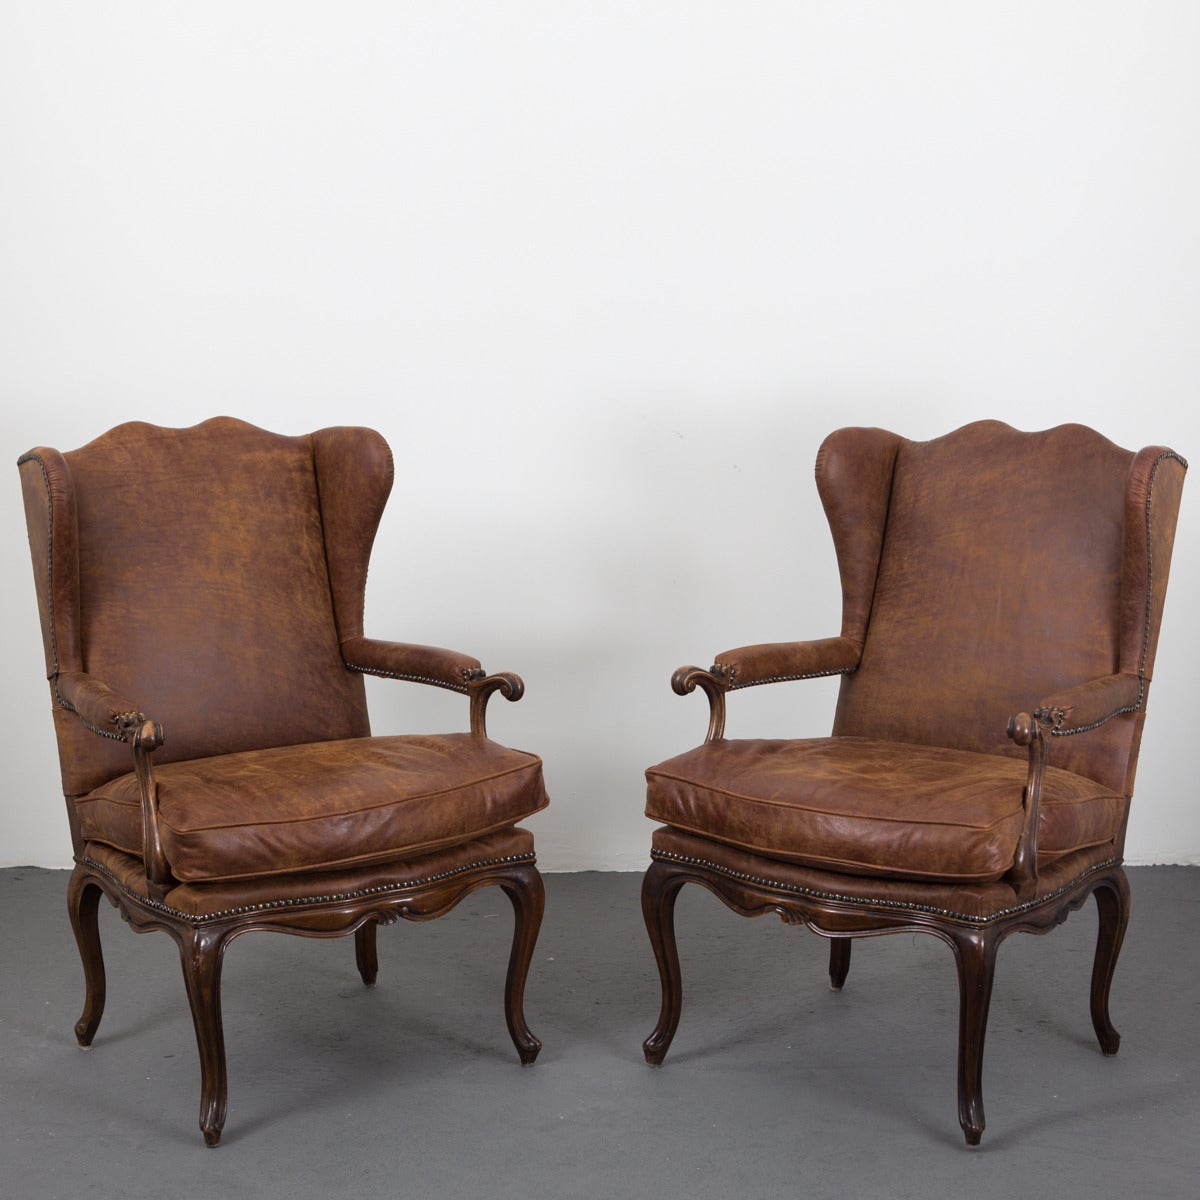 A pair of handsome wingback chairs in oak made in Sweden during the 20th Century in the Rococo style. Upholstered in brown vintage leather, decorated with nail heads.